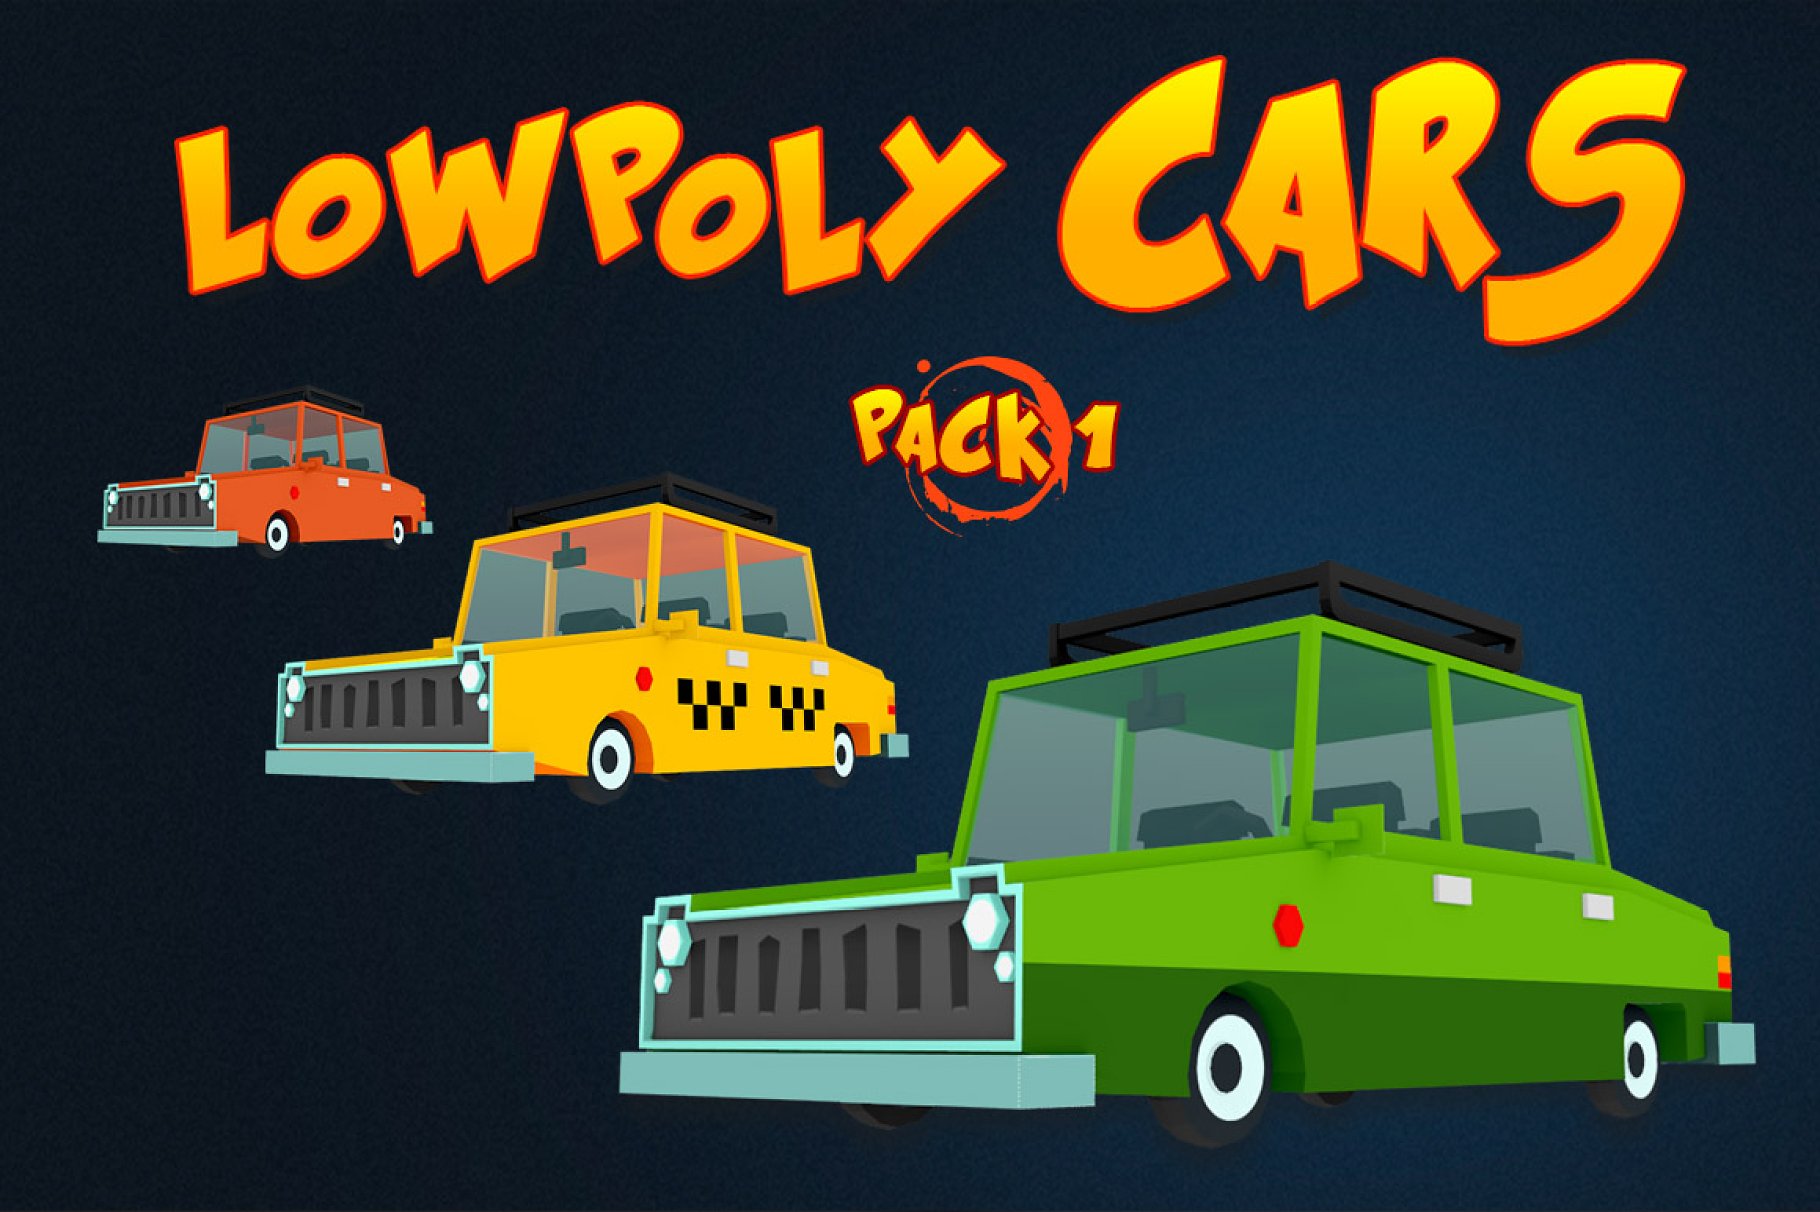 Yellow lettering "LowPoly Cars" and red, yellow and green cars illustrations on a dark blue background.